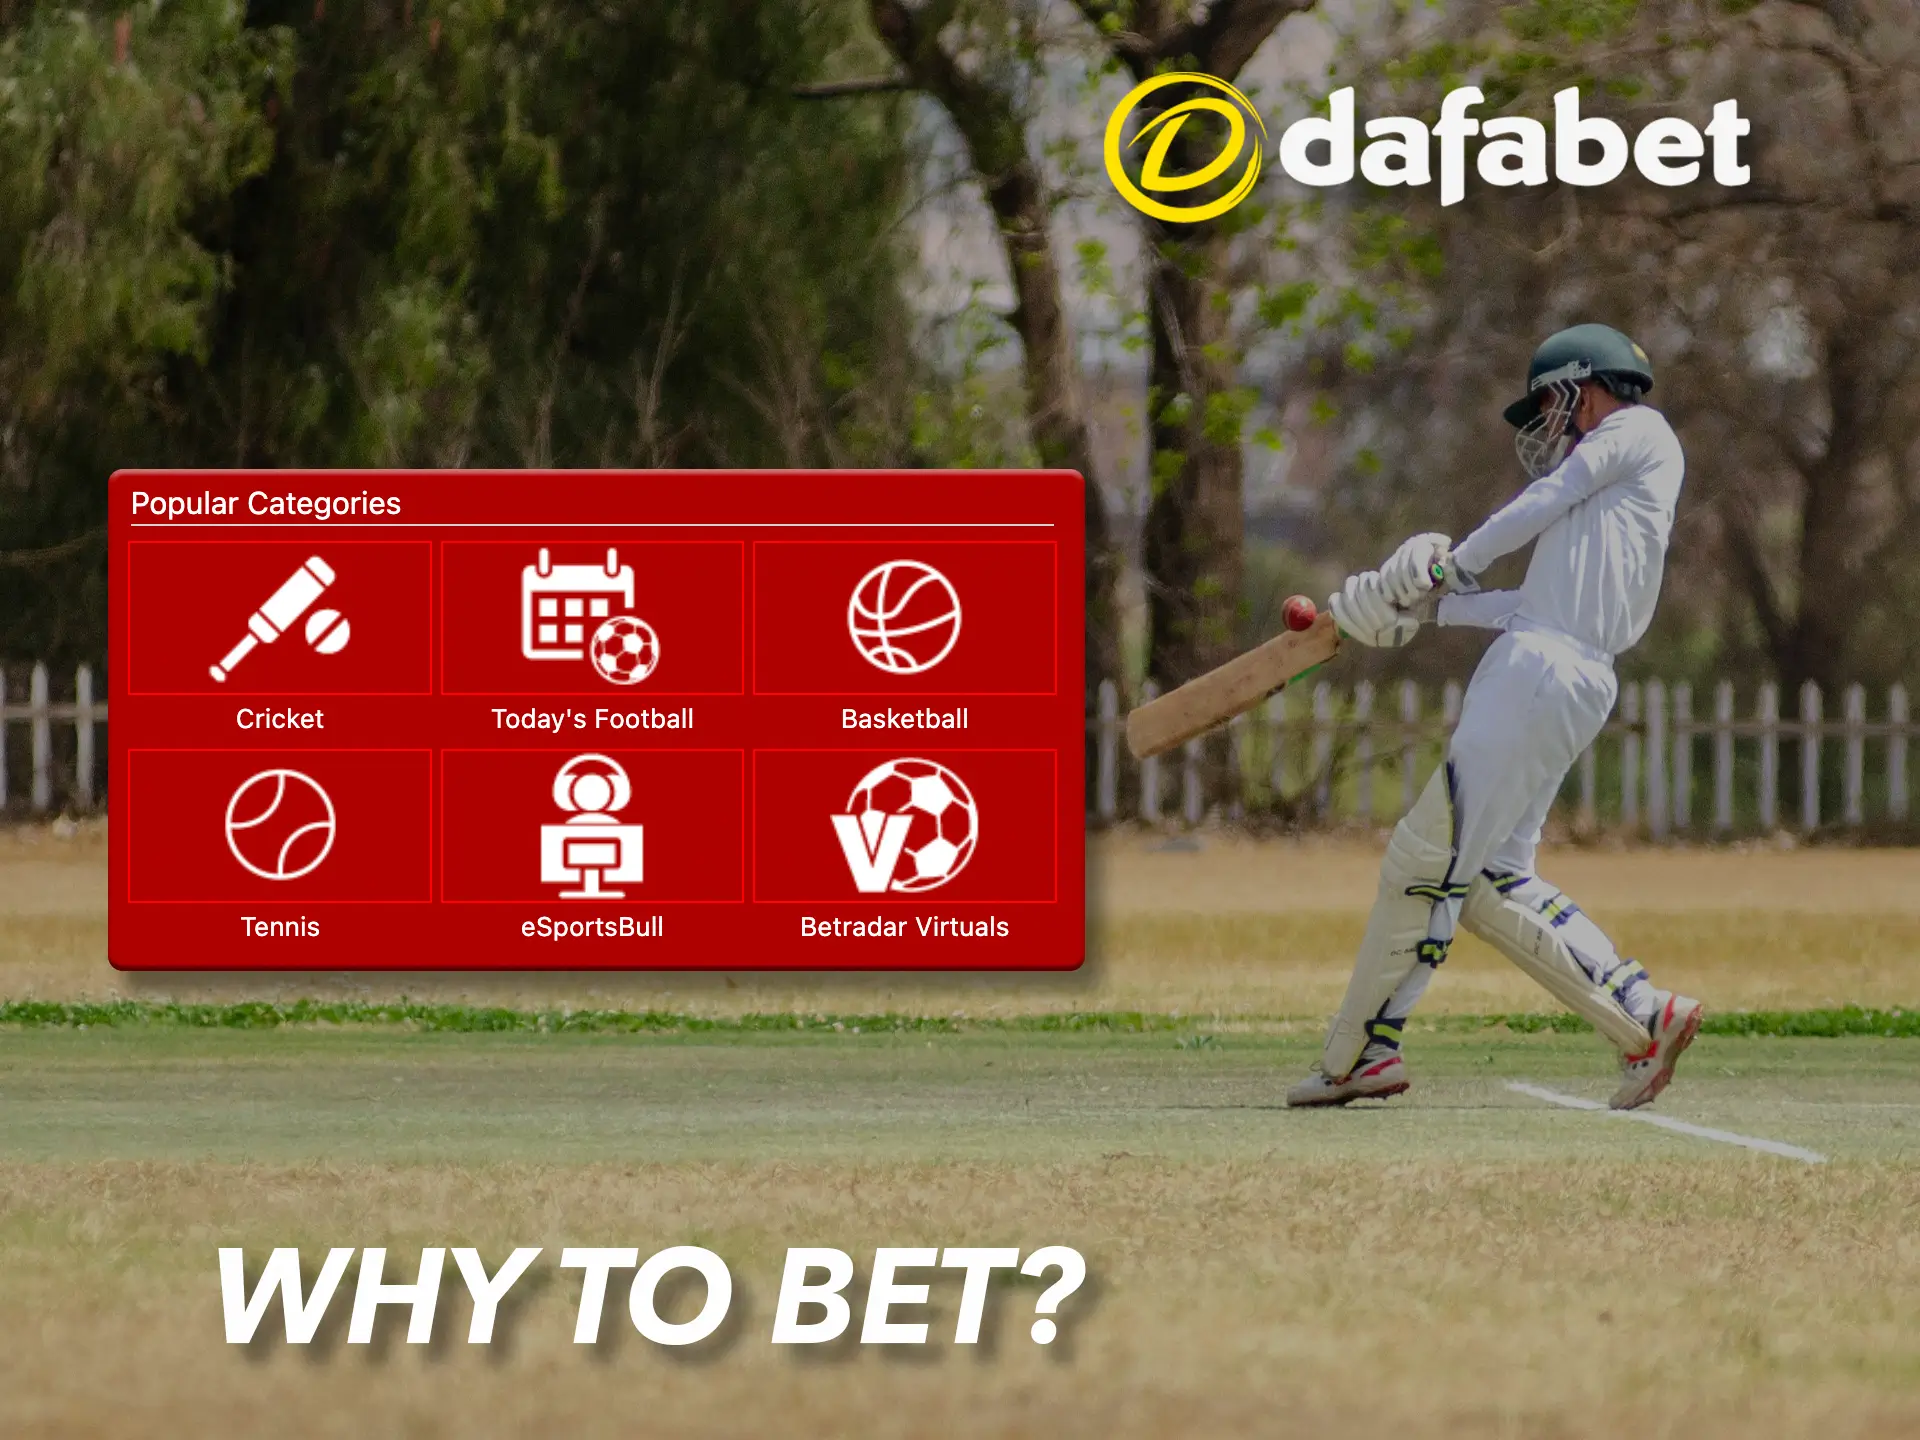 Immerse yourself in the world of Dafabet Casino and have fun.